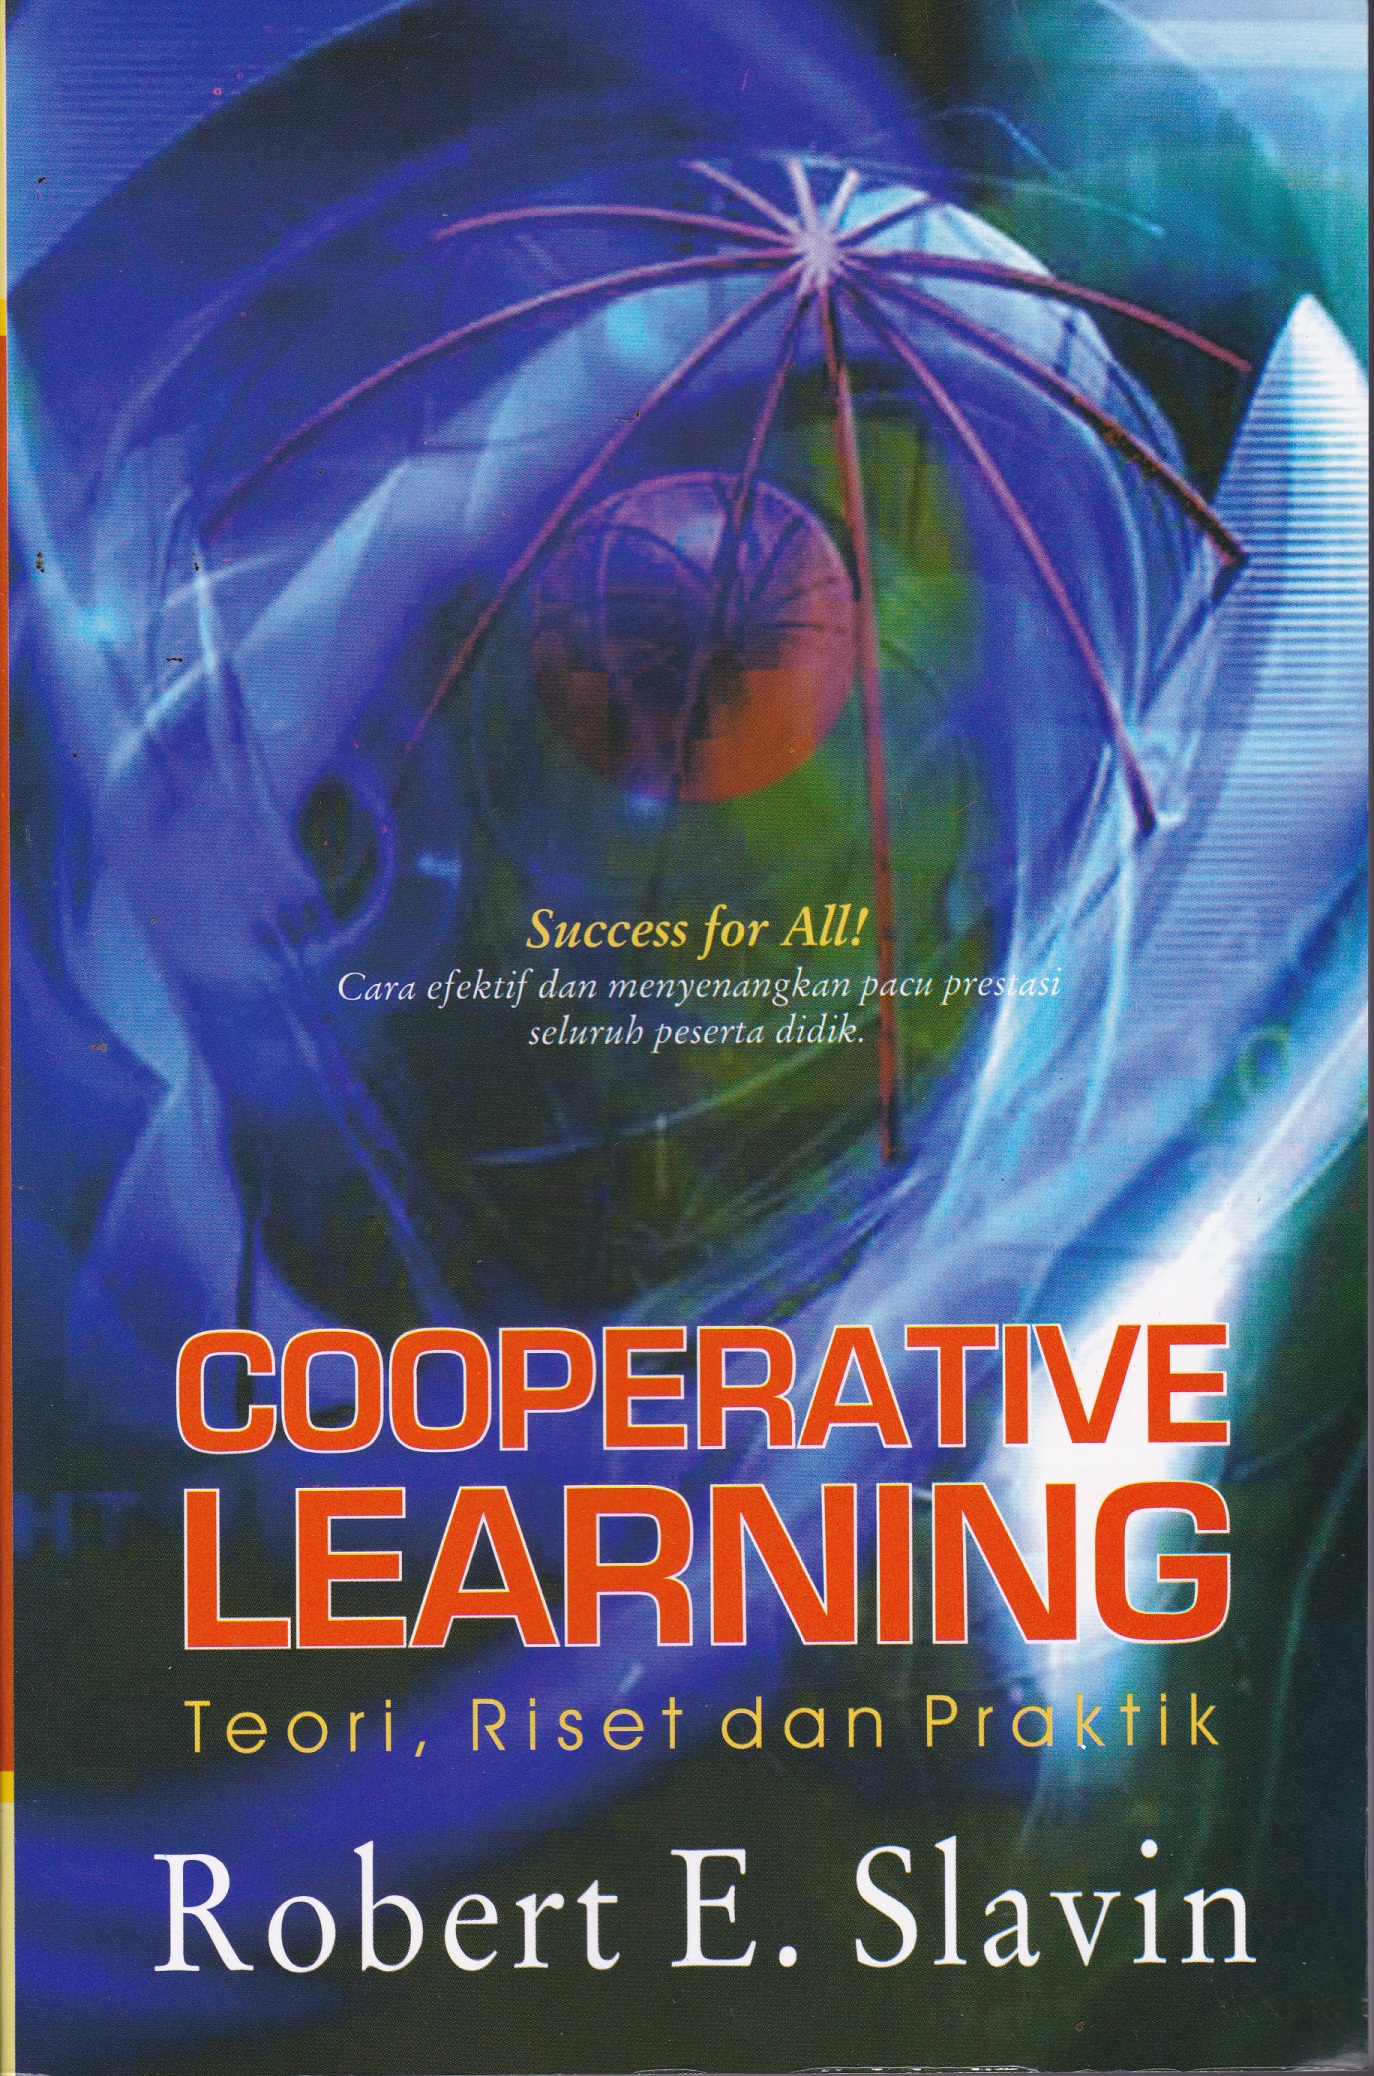 COOPERATIVE LEARNING